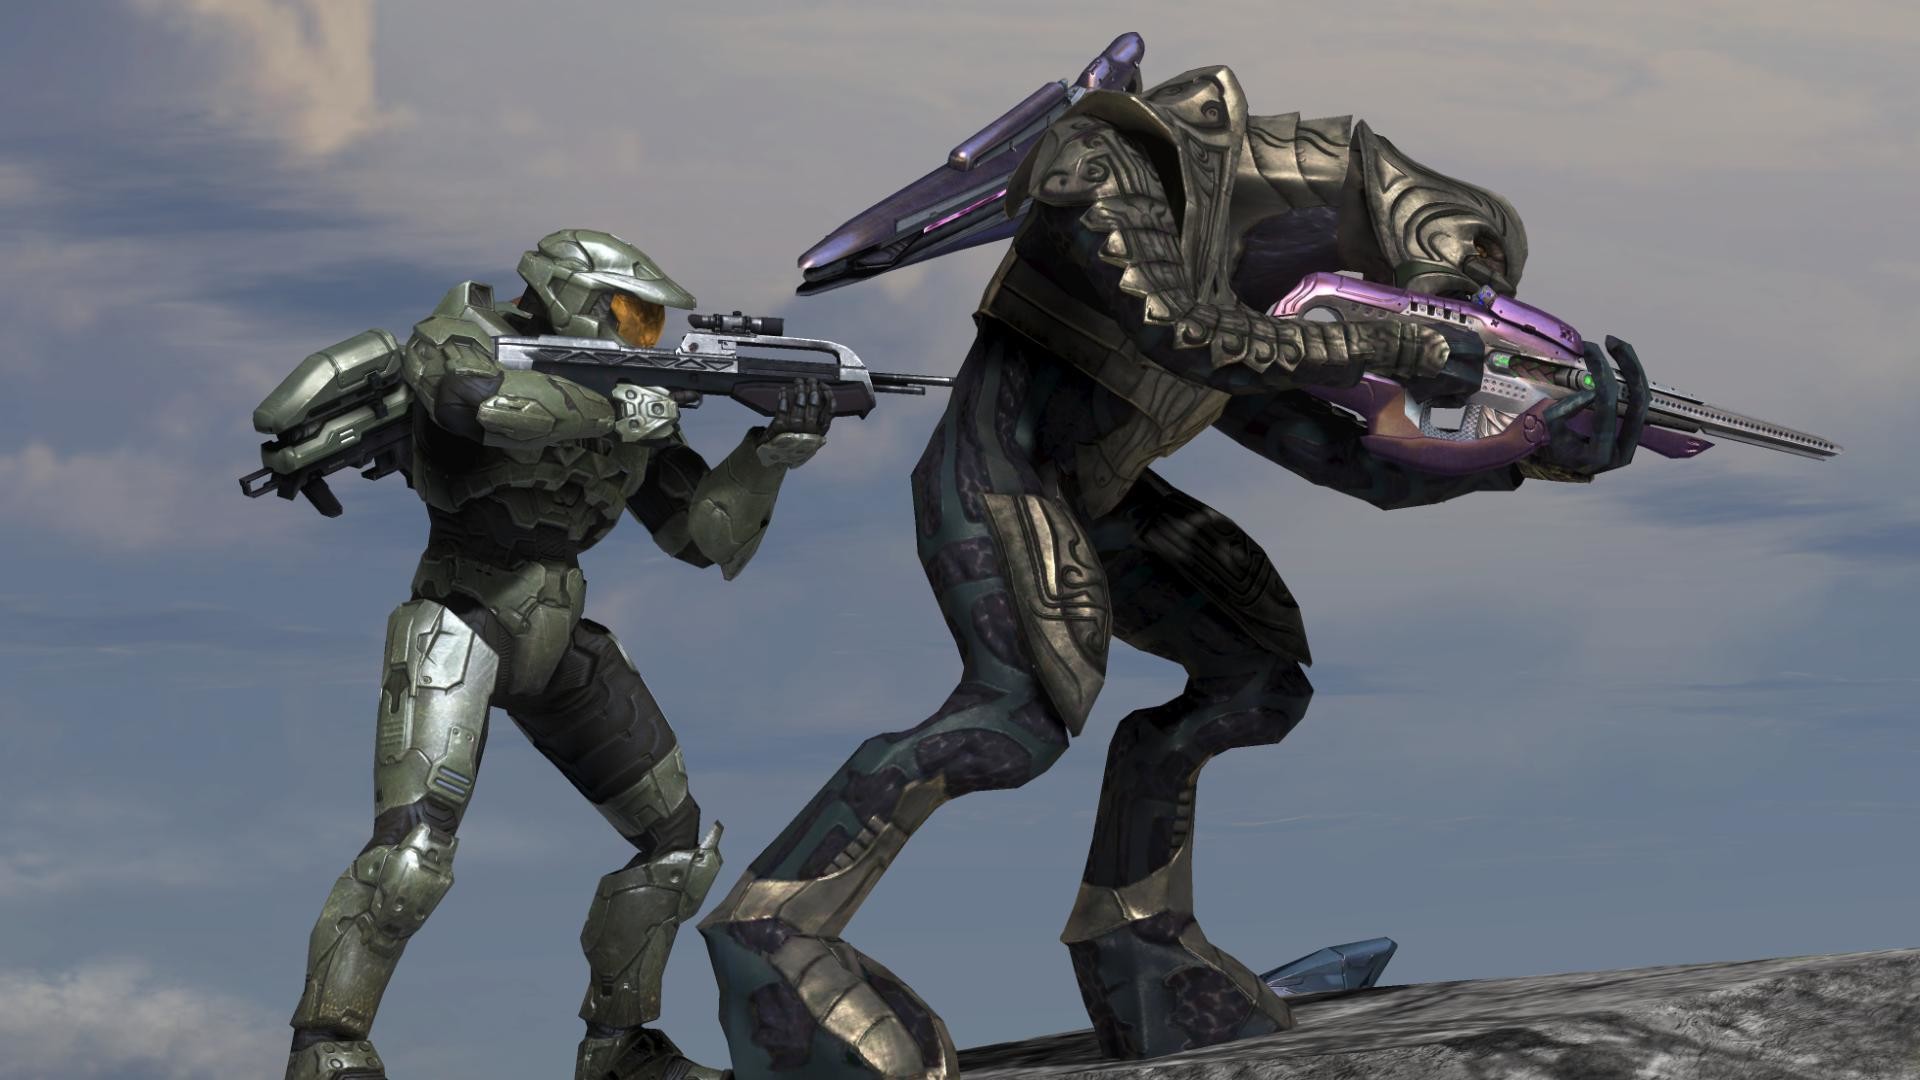 1920x1080 Death in Halo 3 is vindicated by way of instantaneous responses – Chief  kills Spark after he kills Johnson, and you're witness to the Arbiter ...